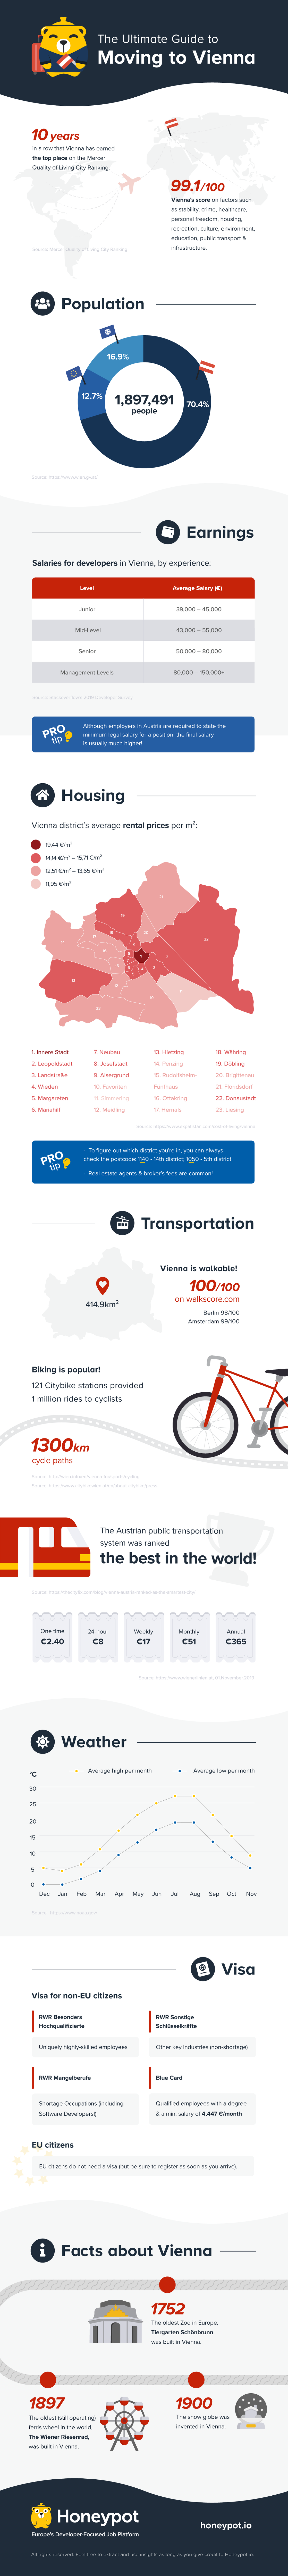 Moving to Vienna infographic.